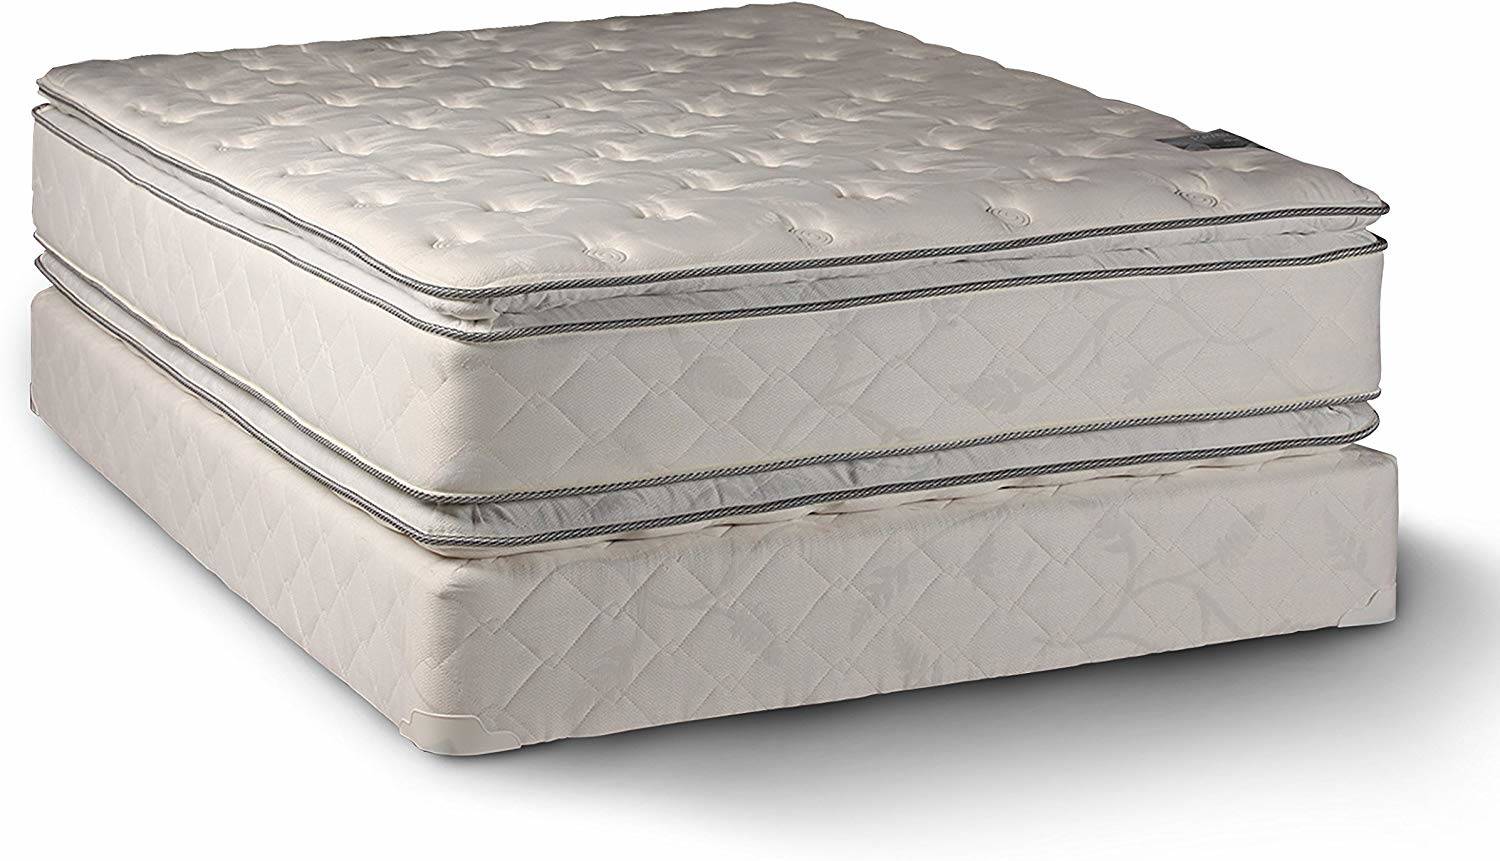 double sided mattresses near me